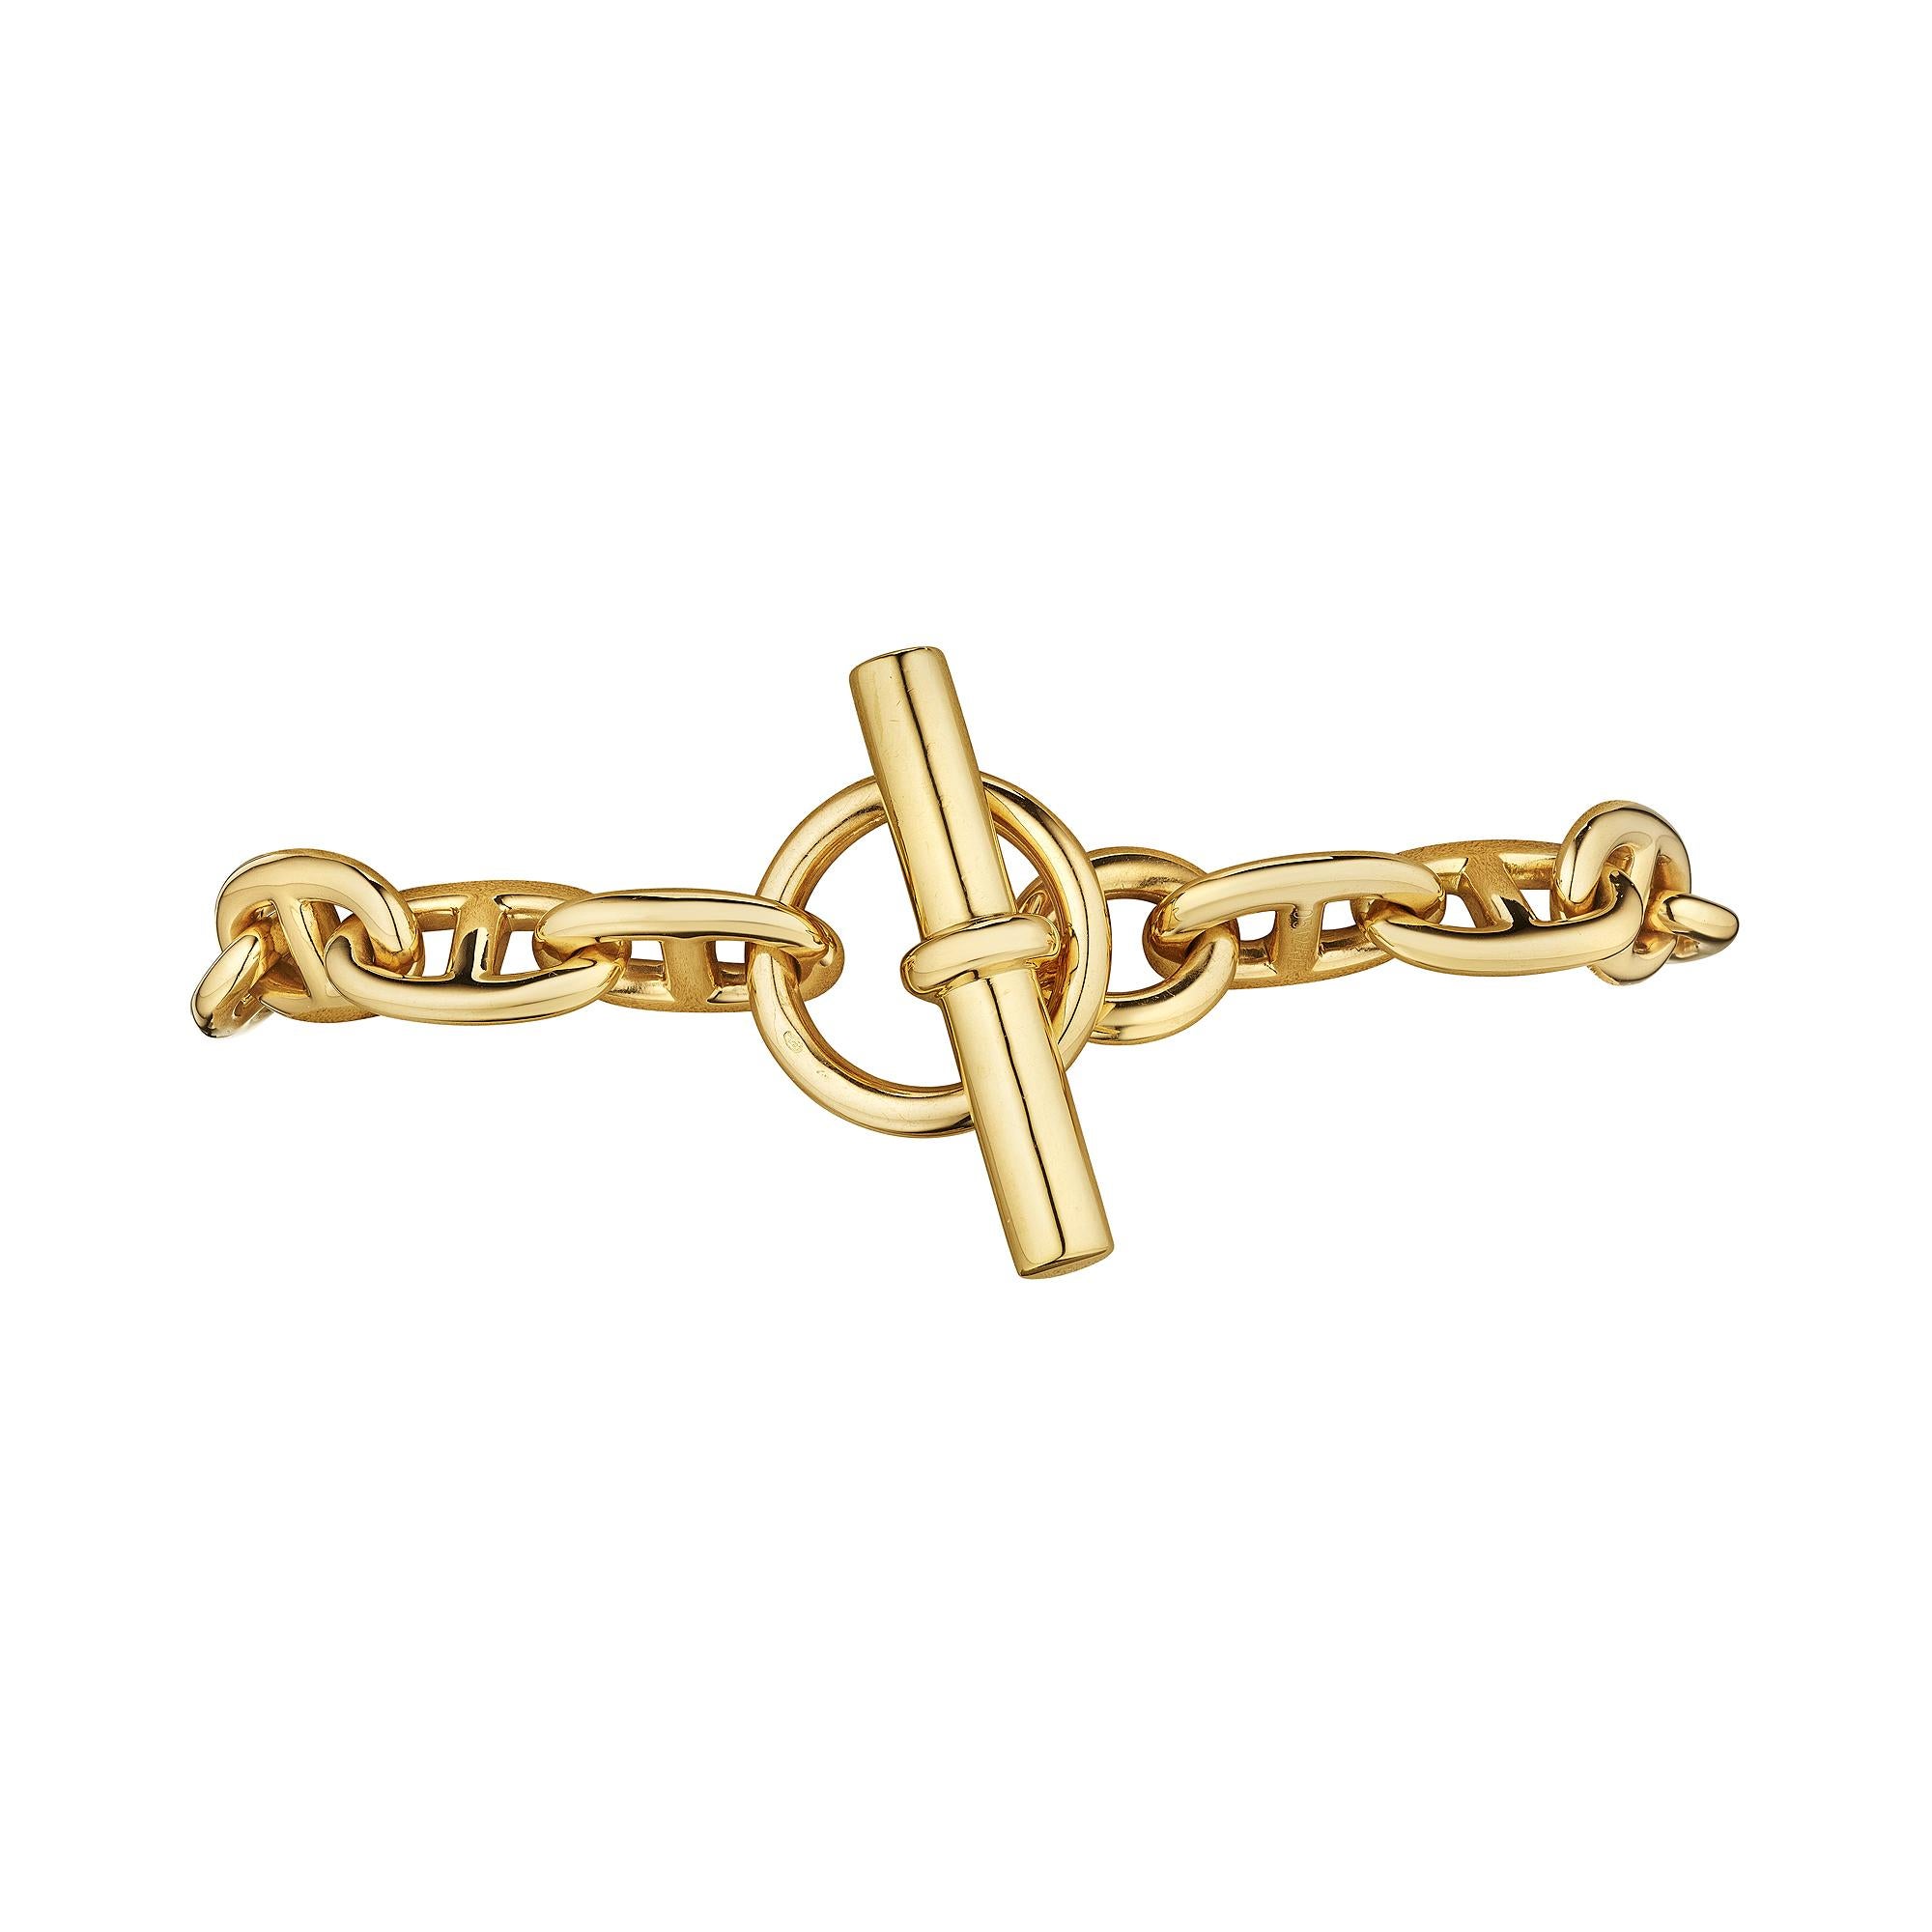 Bold and uncompromising this Hermes Paris modernist 'chaine d'ancre' toggle medium link bracelet is the statement piece you have been searching for. With 15 links, this polished 18 karat yellow gold bracelet is extraordinarily collectible and